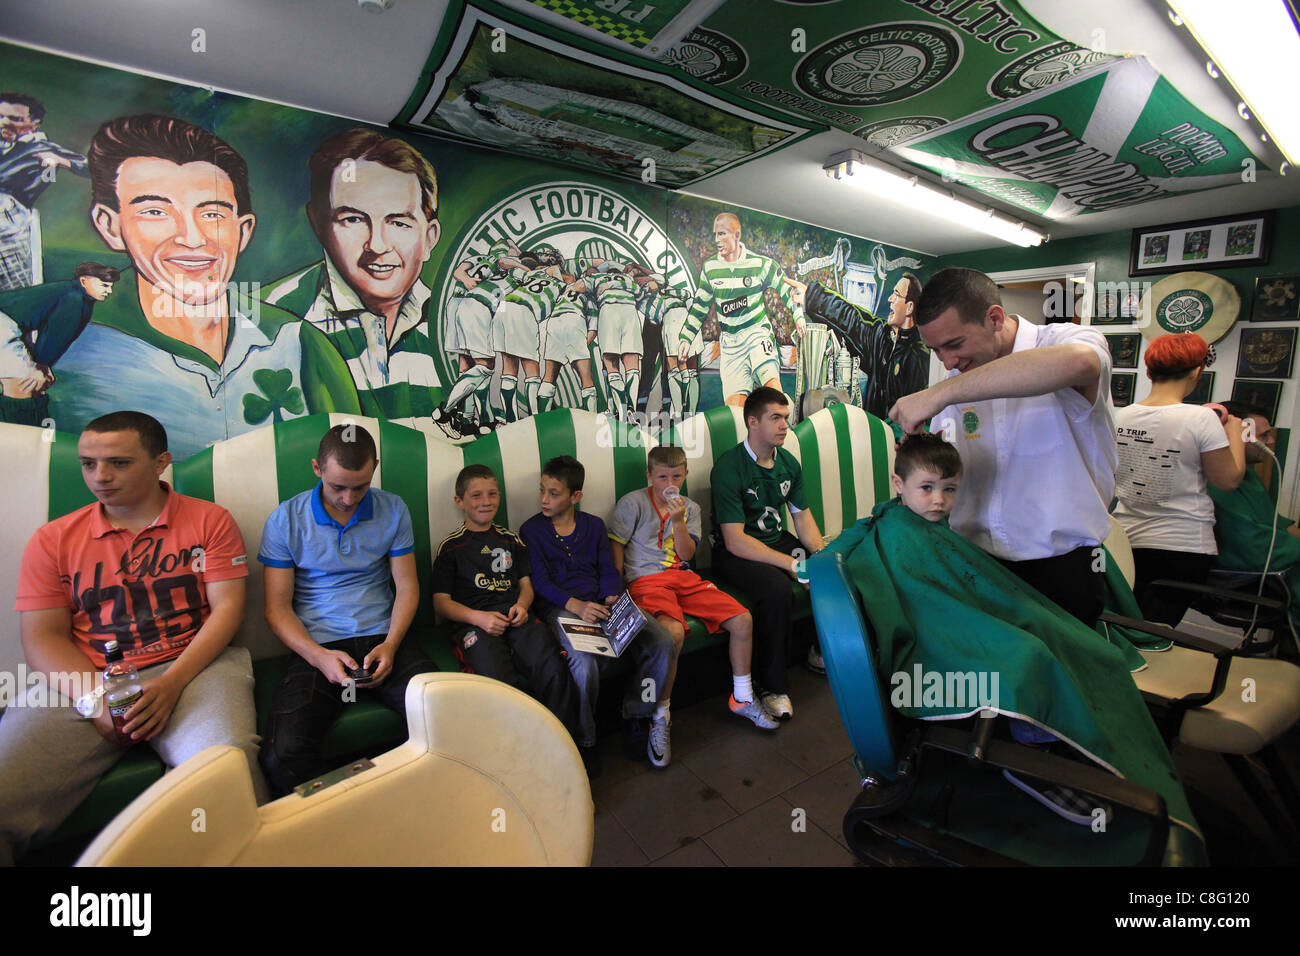 A young boy receives a hair cut with Celtic Football (soccer) murals behind him. Stock Photo